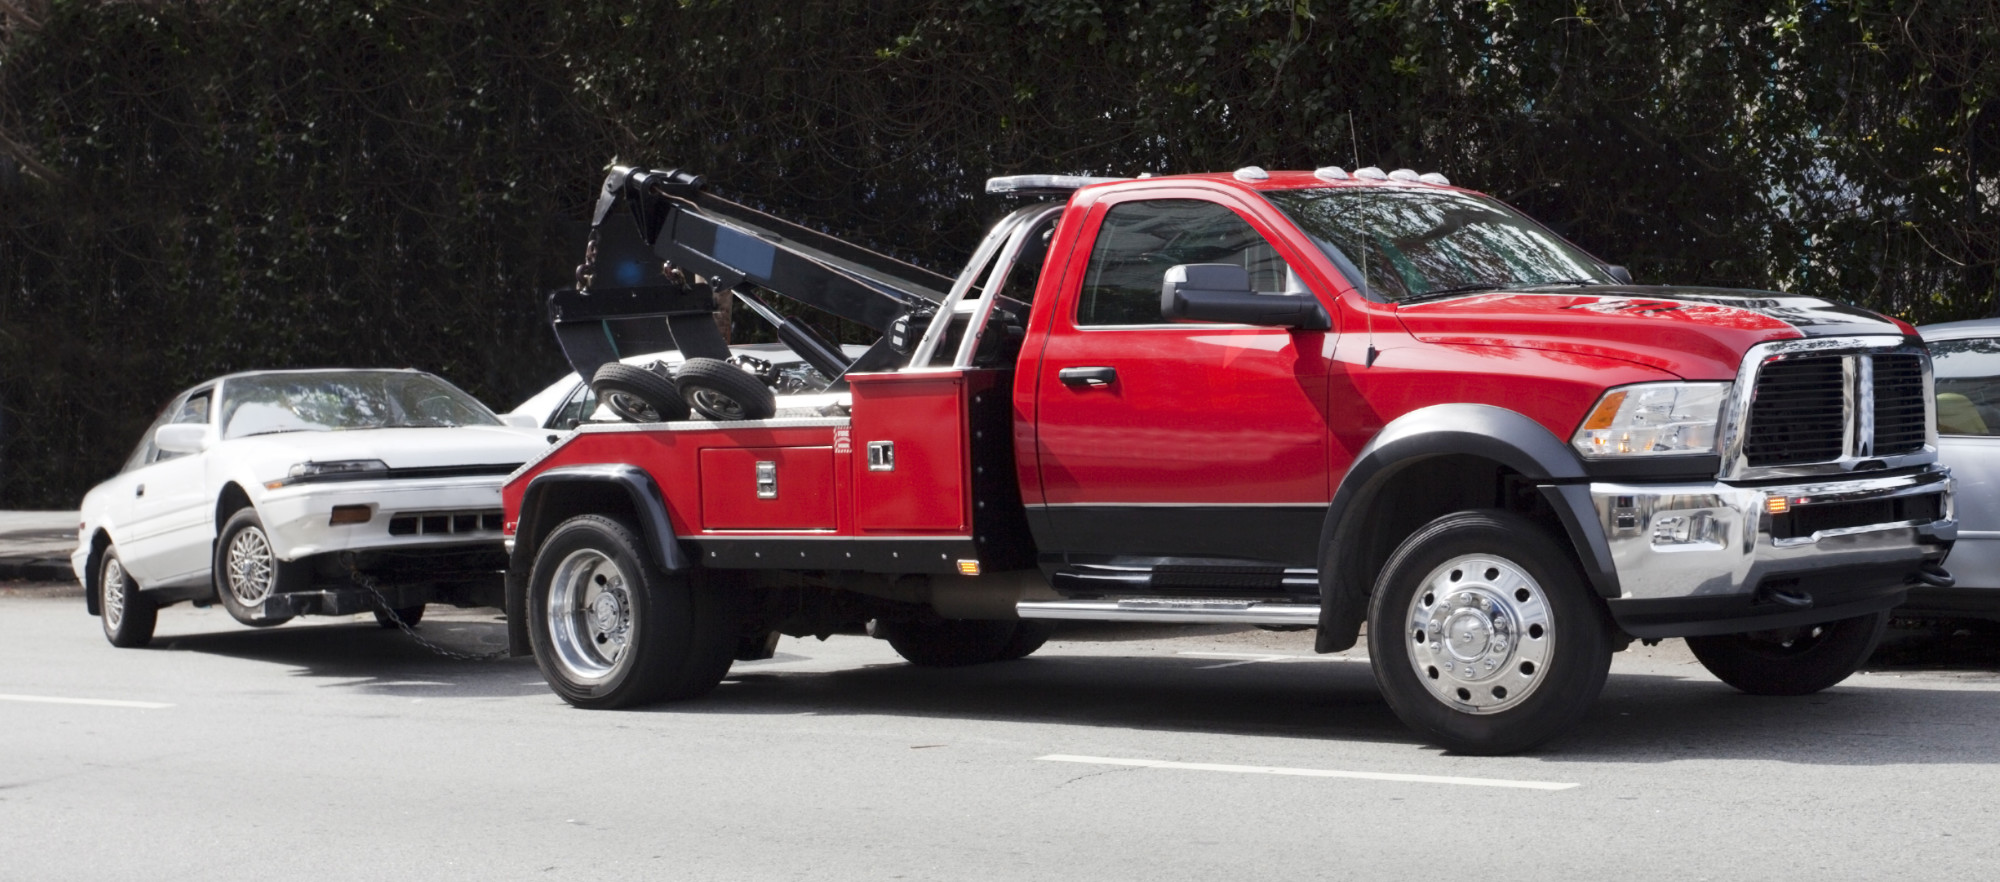 tow truck towing car